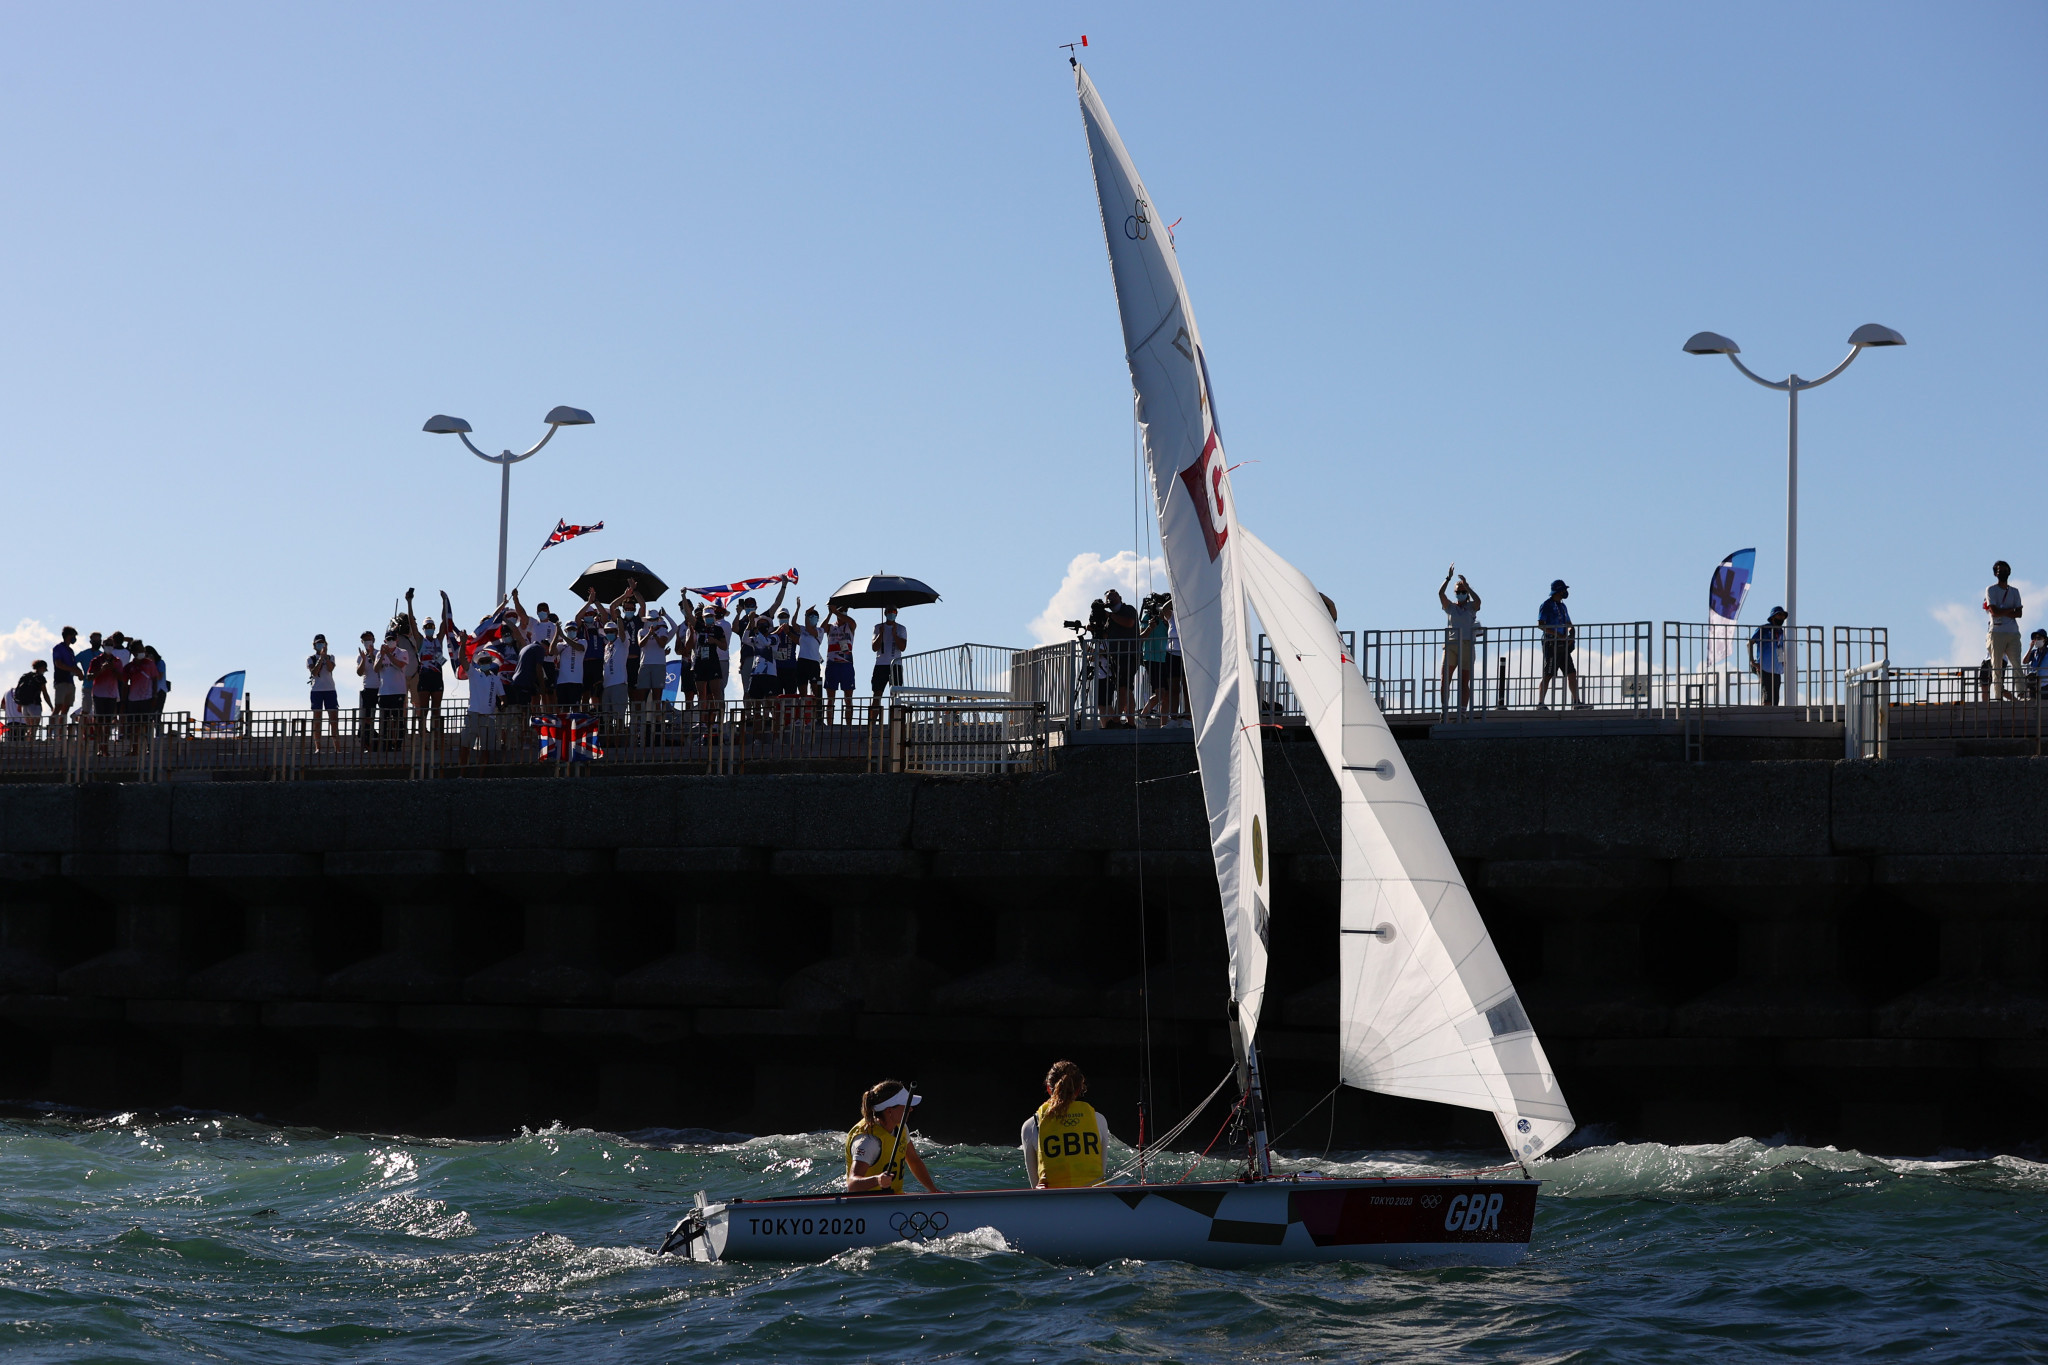 An Group D sport like sailing can expect to receive more than $16 million from the International Olympic Committee as part of its dividend from Tokyo 2020 ©Getty Images